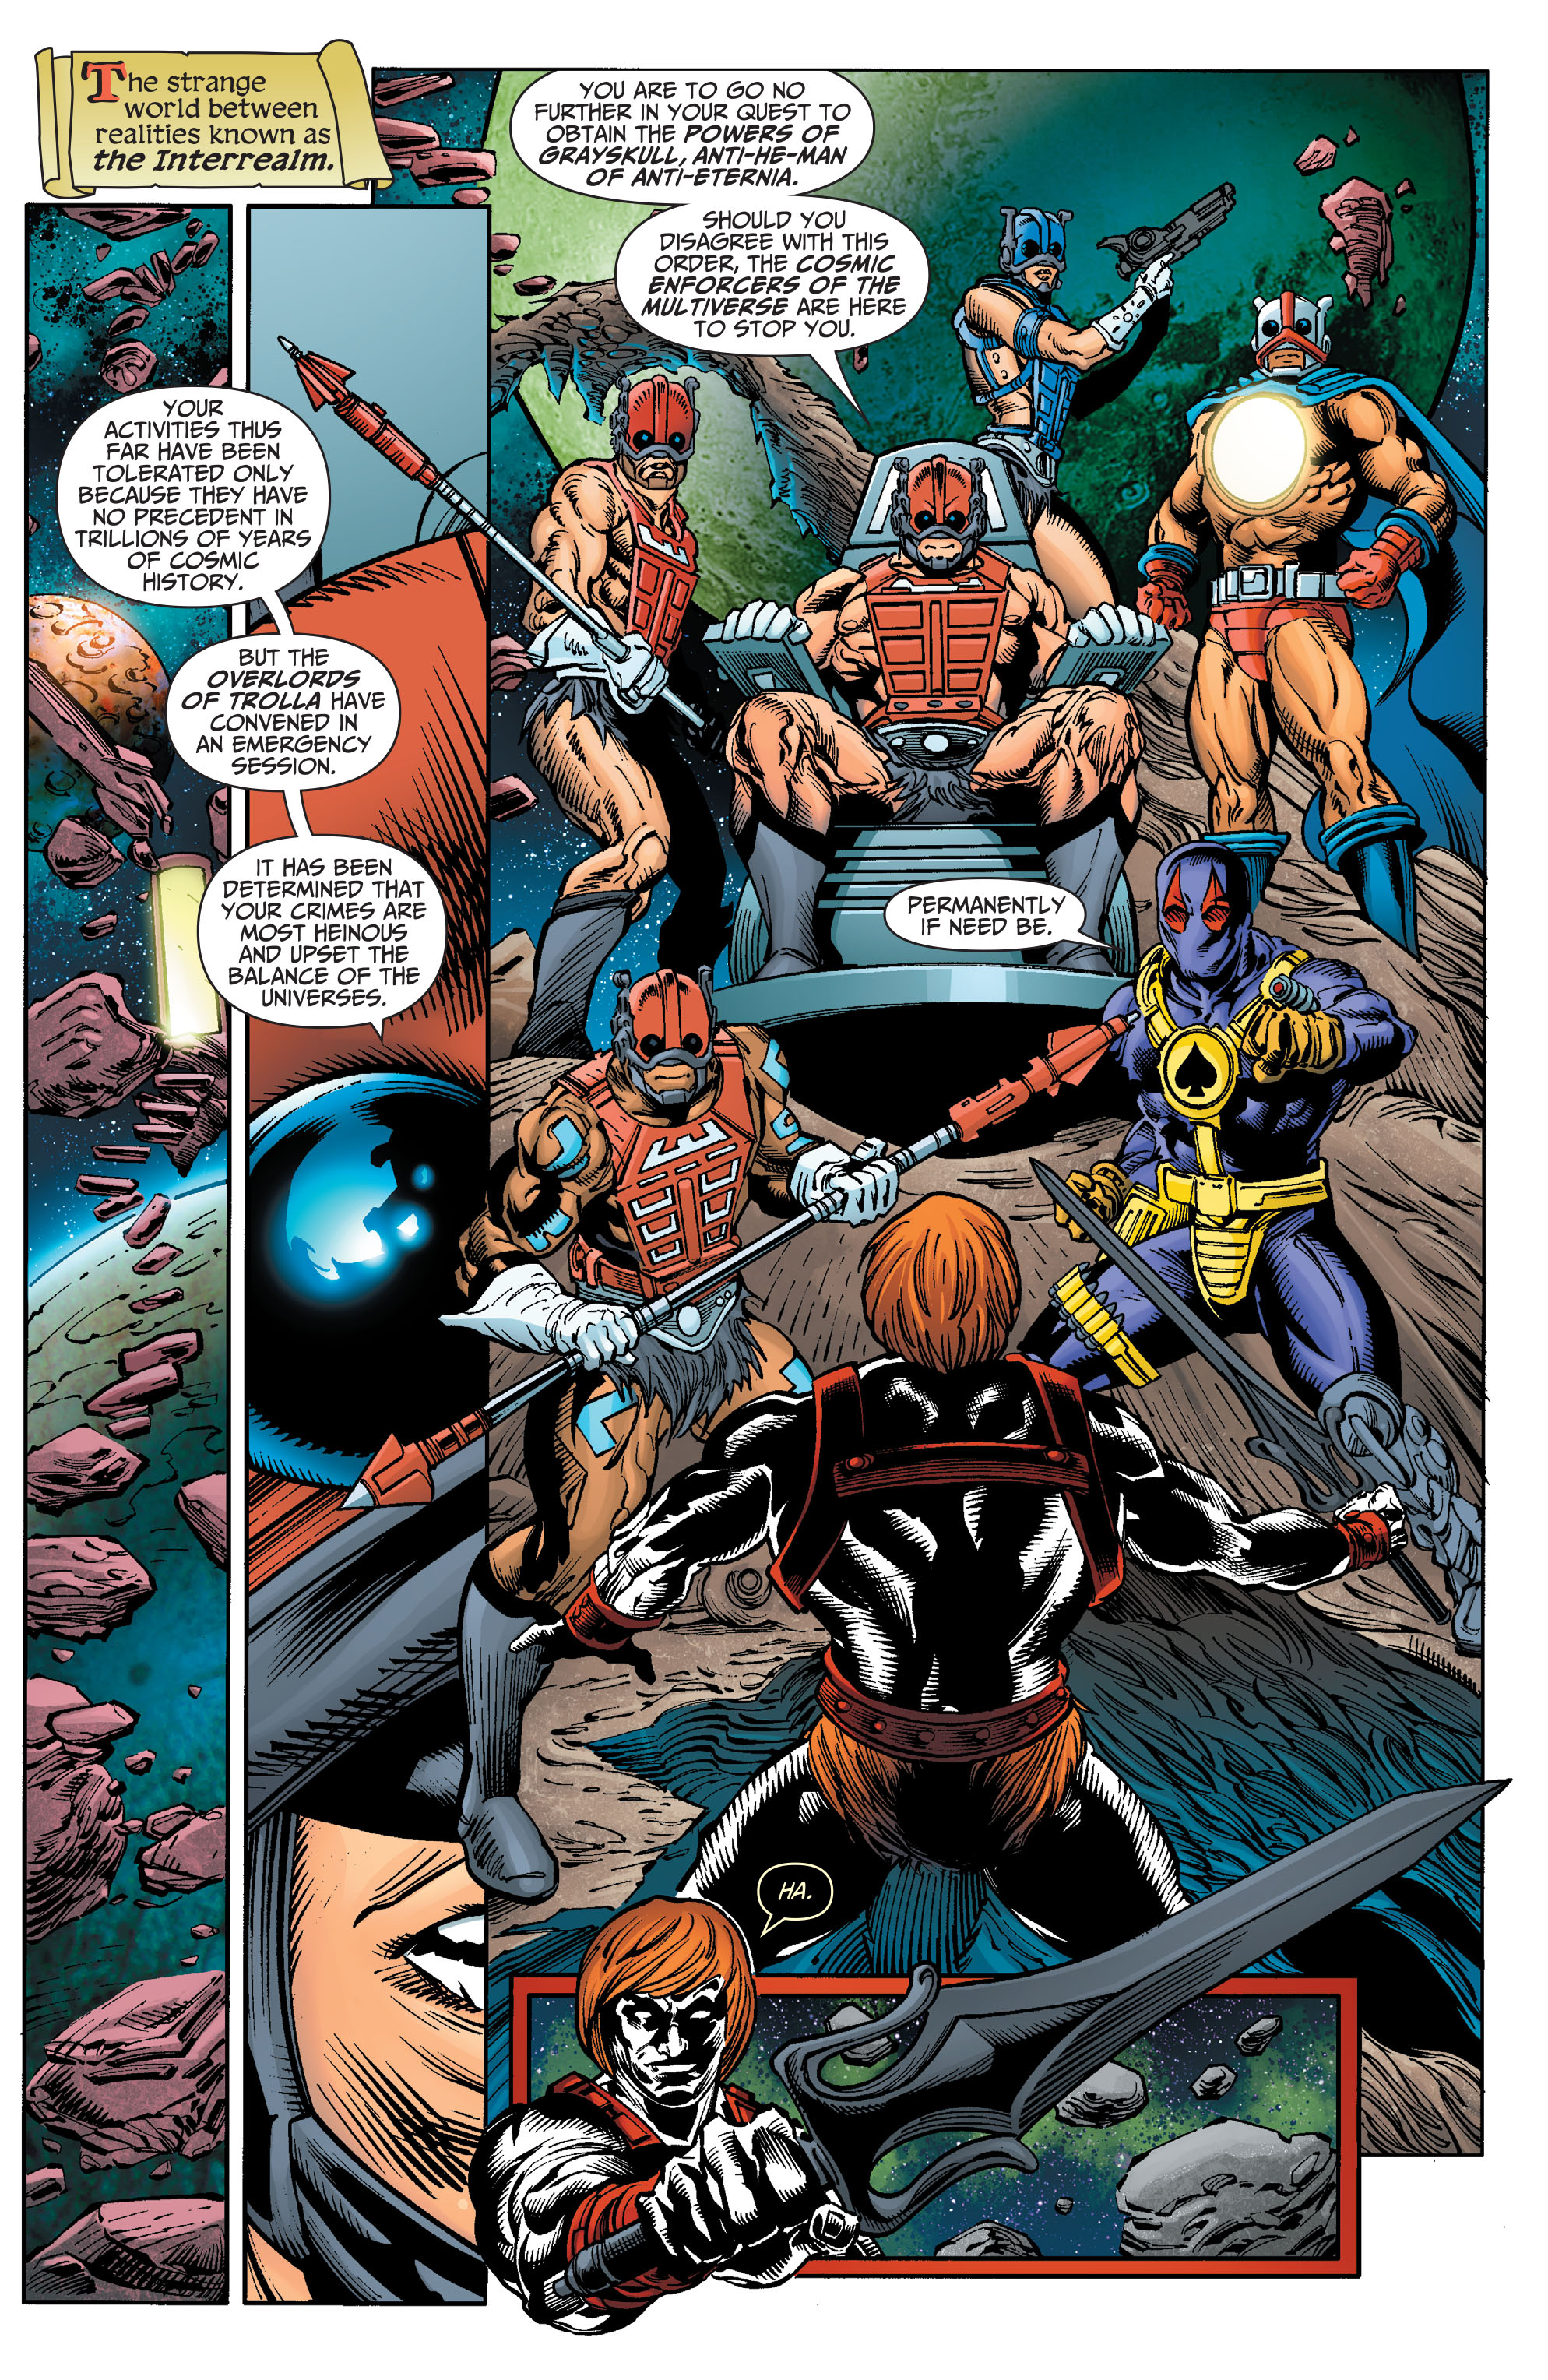 He-Man & the Masters of the Multiverse (2019-): Chapter 3 - Page 3